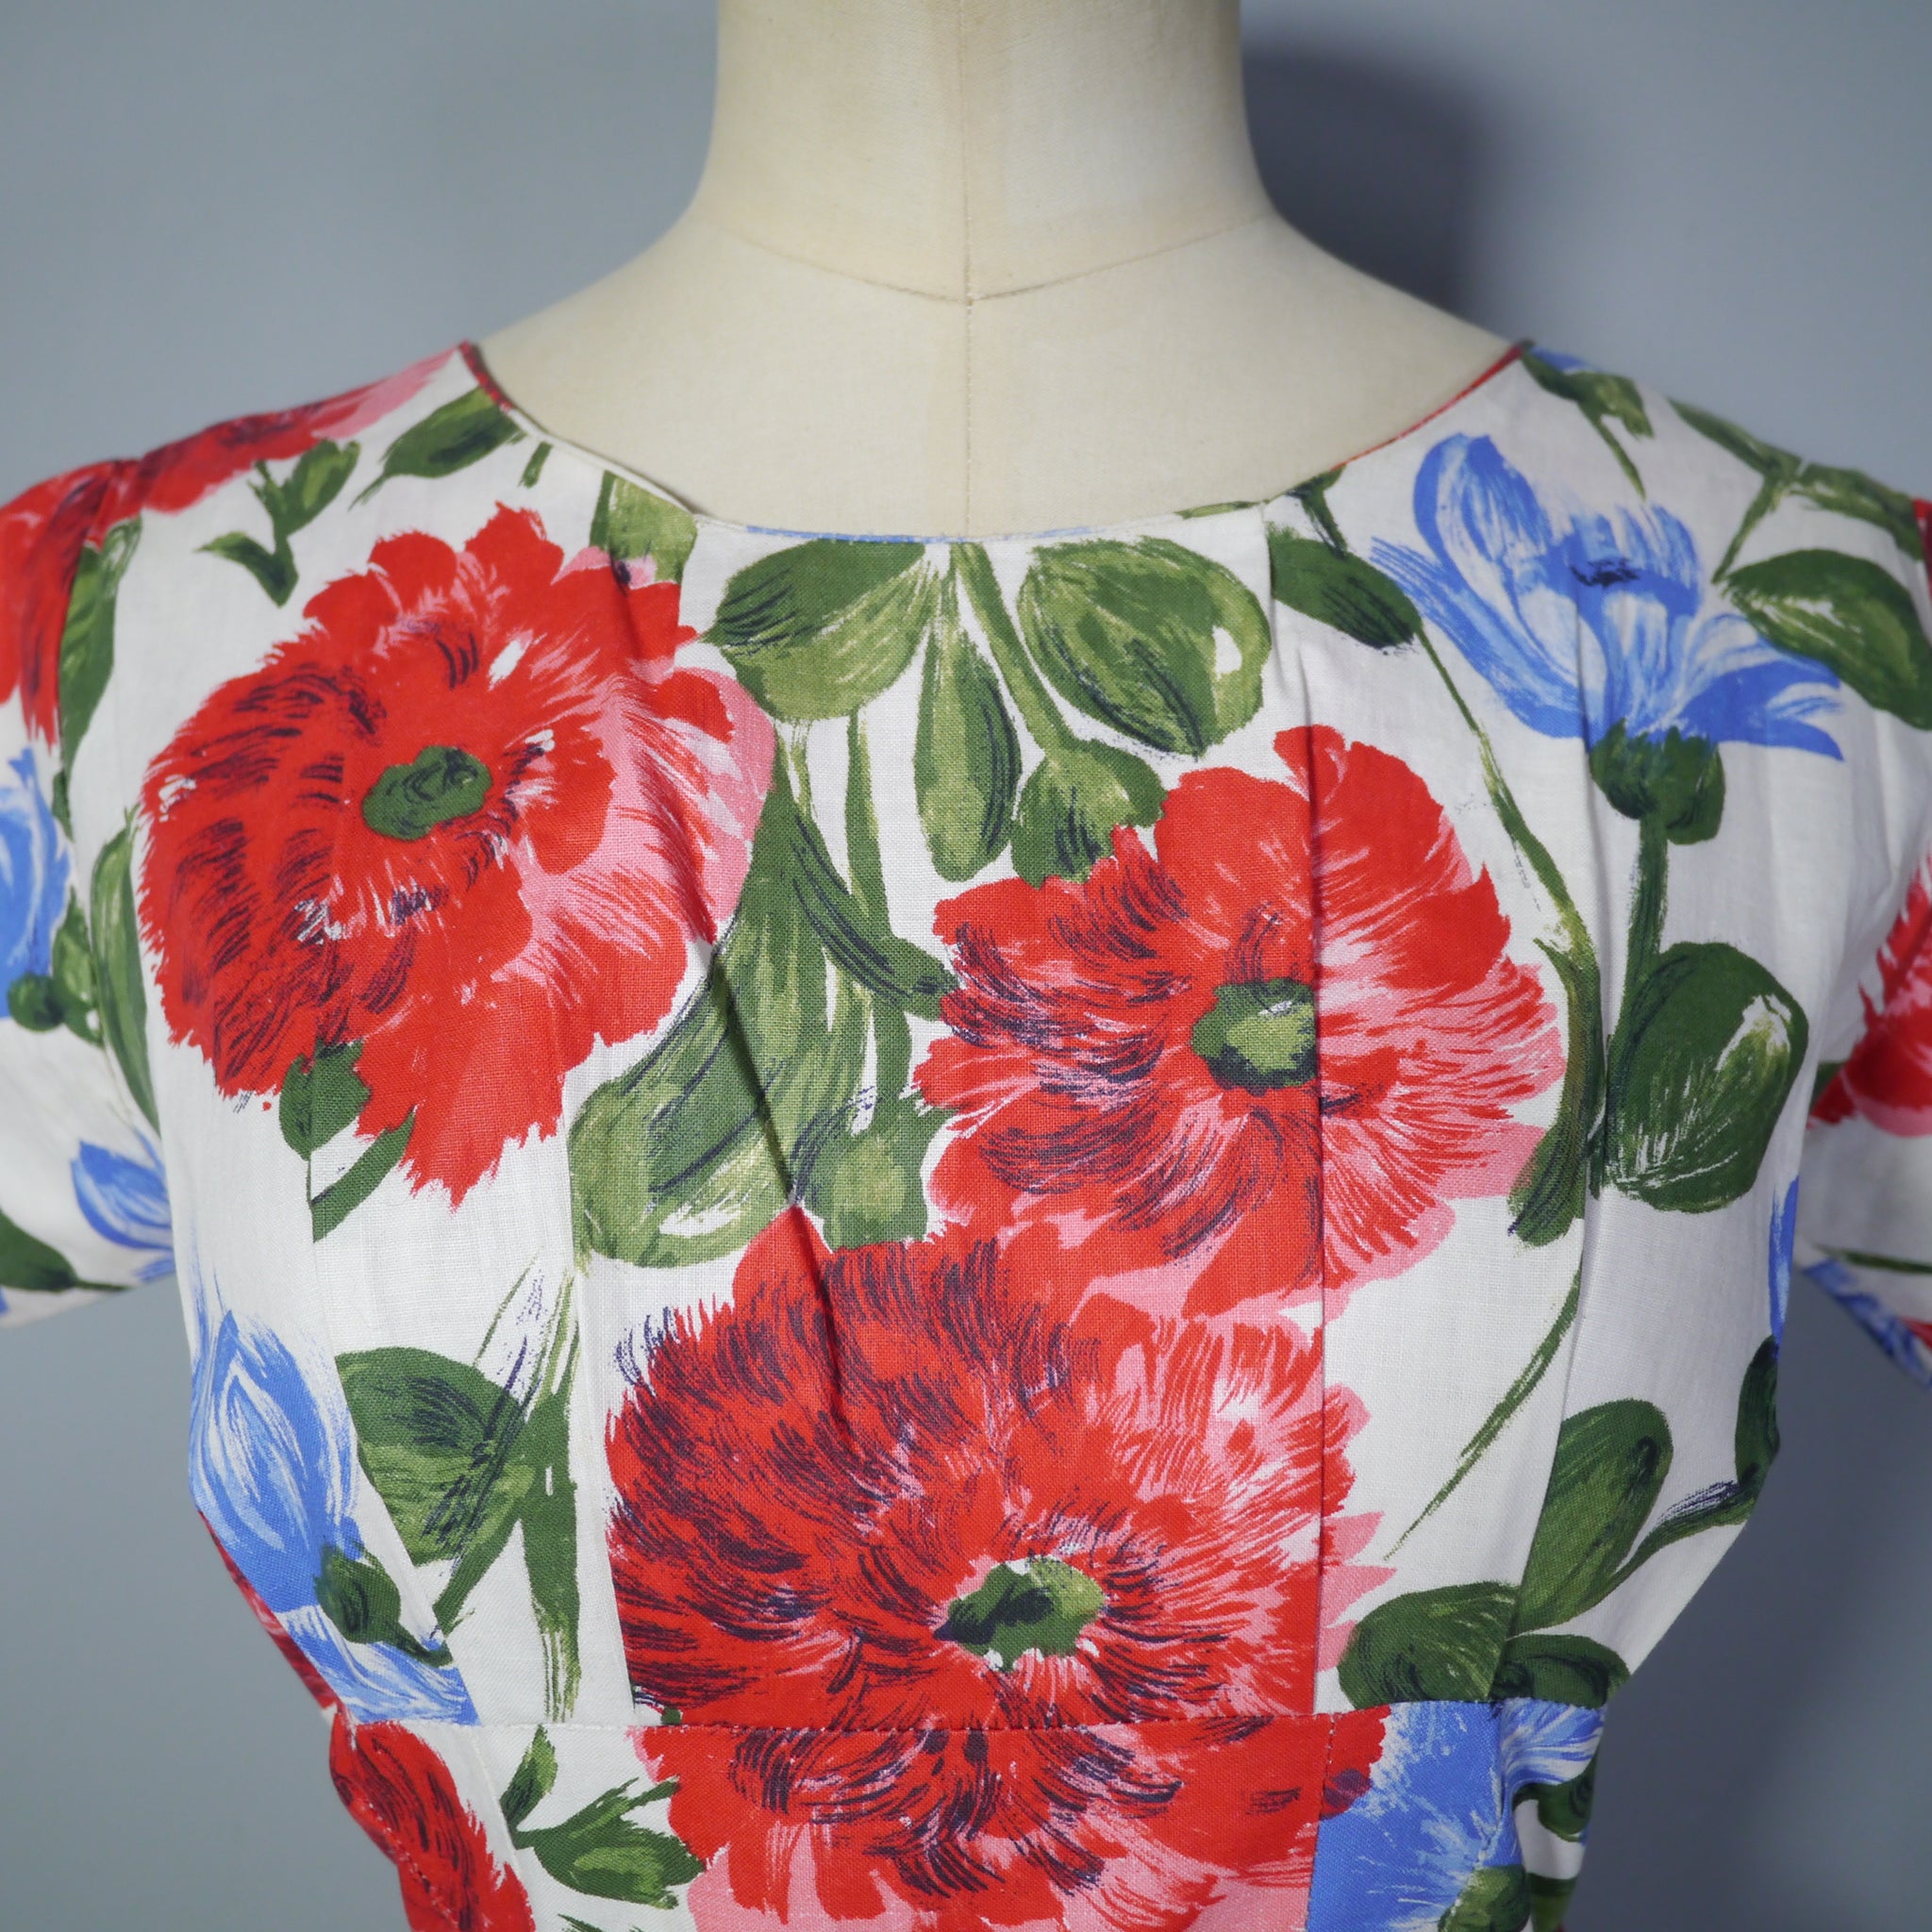 POETRY CLOTHING WOMENS BLUE FLORAL DRESS SZ SMALL 100% COTTON YELLOW RED  FLOWERS